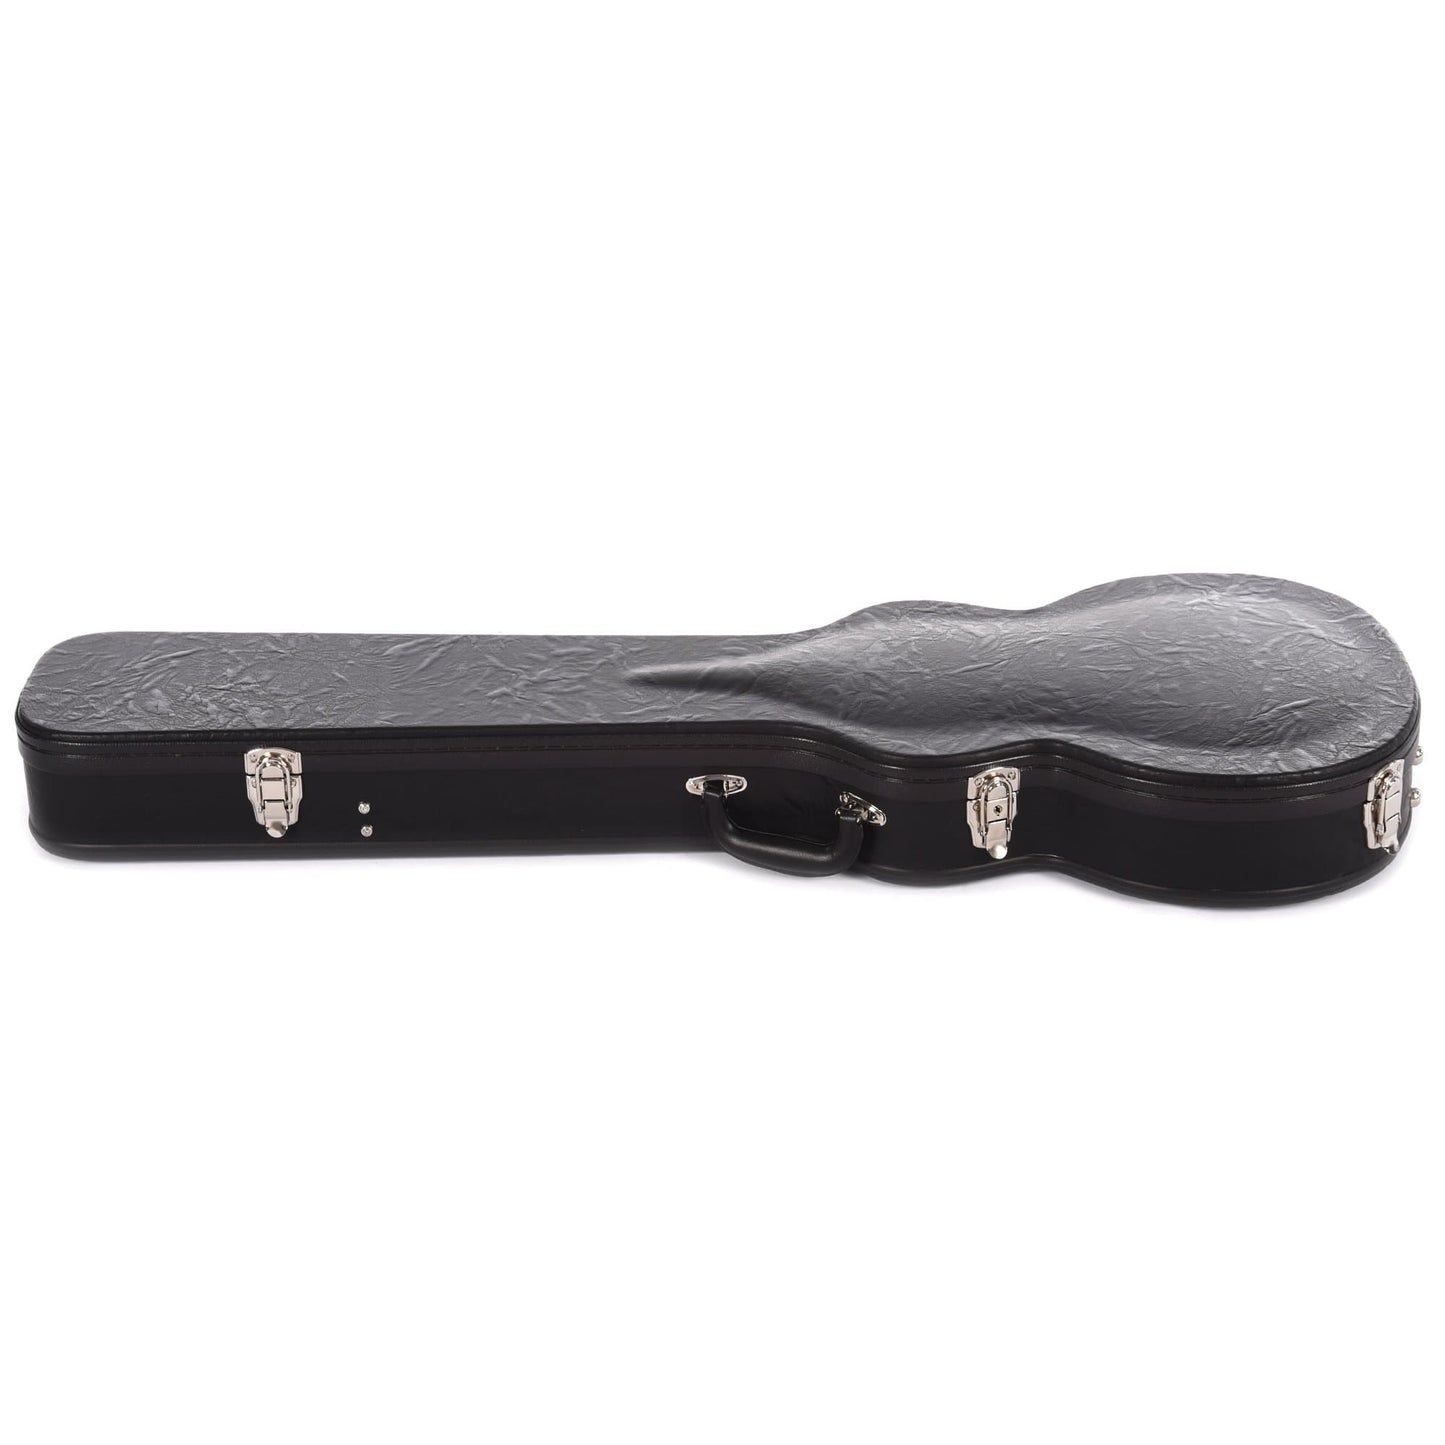 Hofner Club Bass Hard Wooden Case Black Tolex Accessories / Cases and Gig Bags / Bass Cases